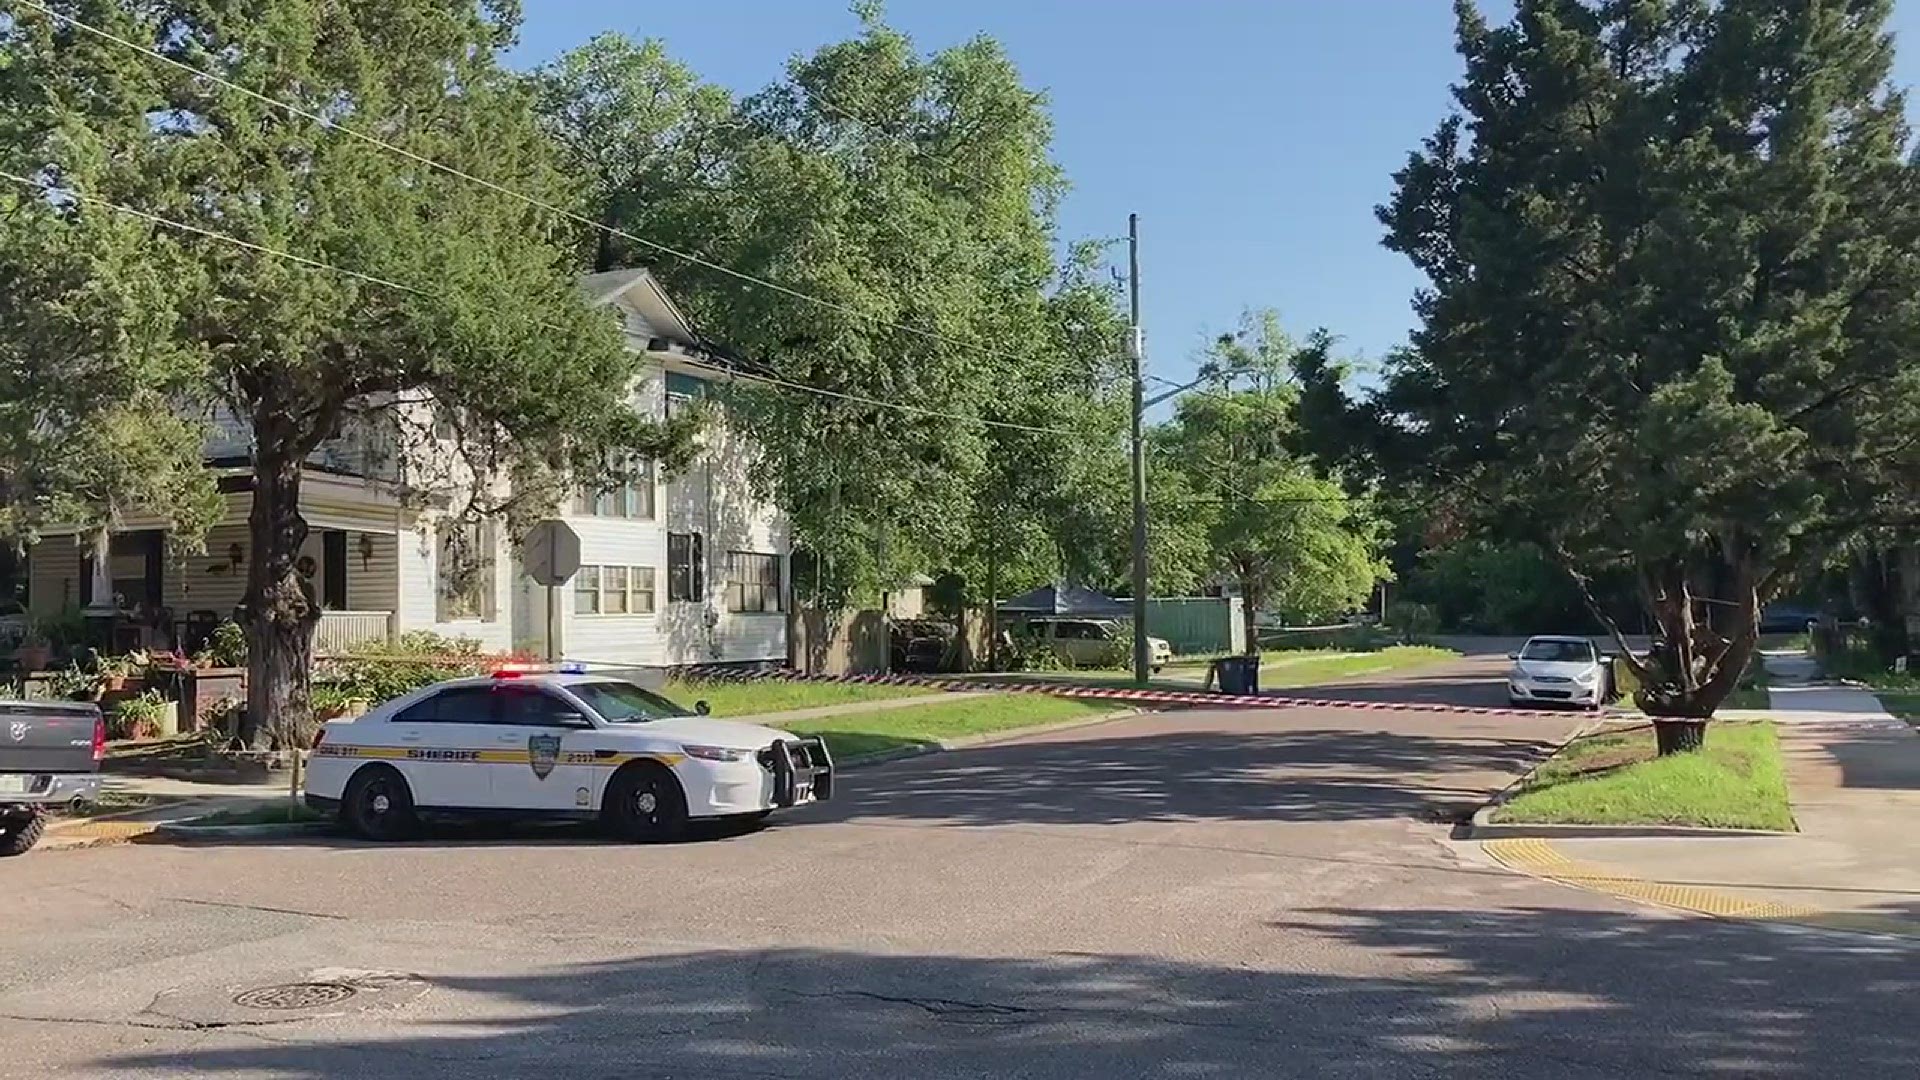 The Jacksonville Sheriff's Office said they were investigating an undetermined death on Woodbine Street Thursday afternoon.